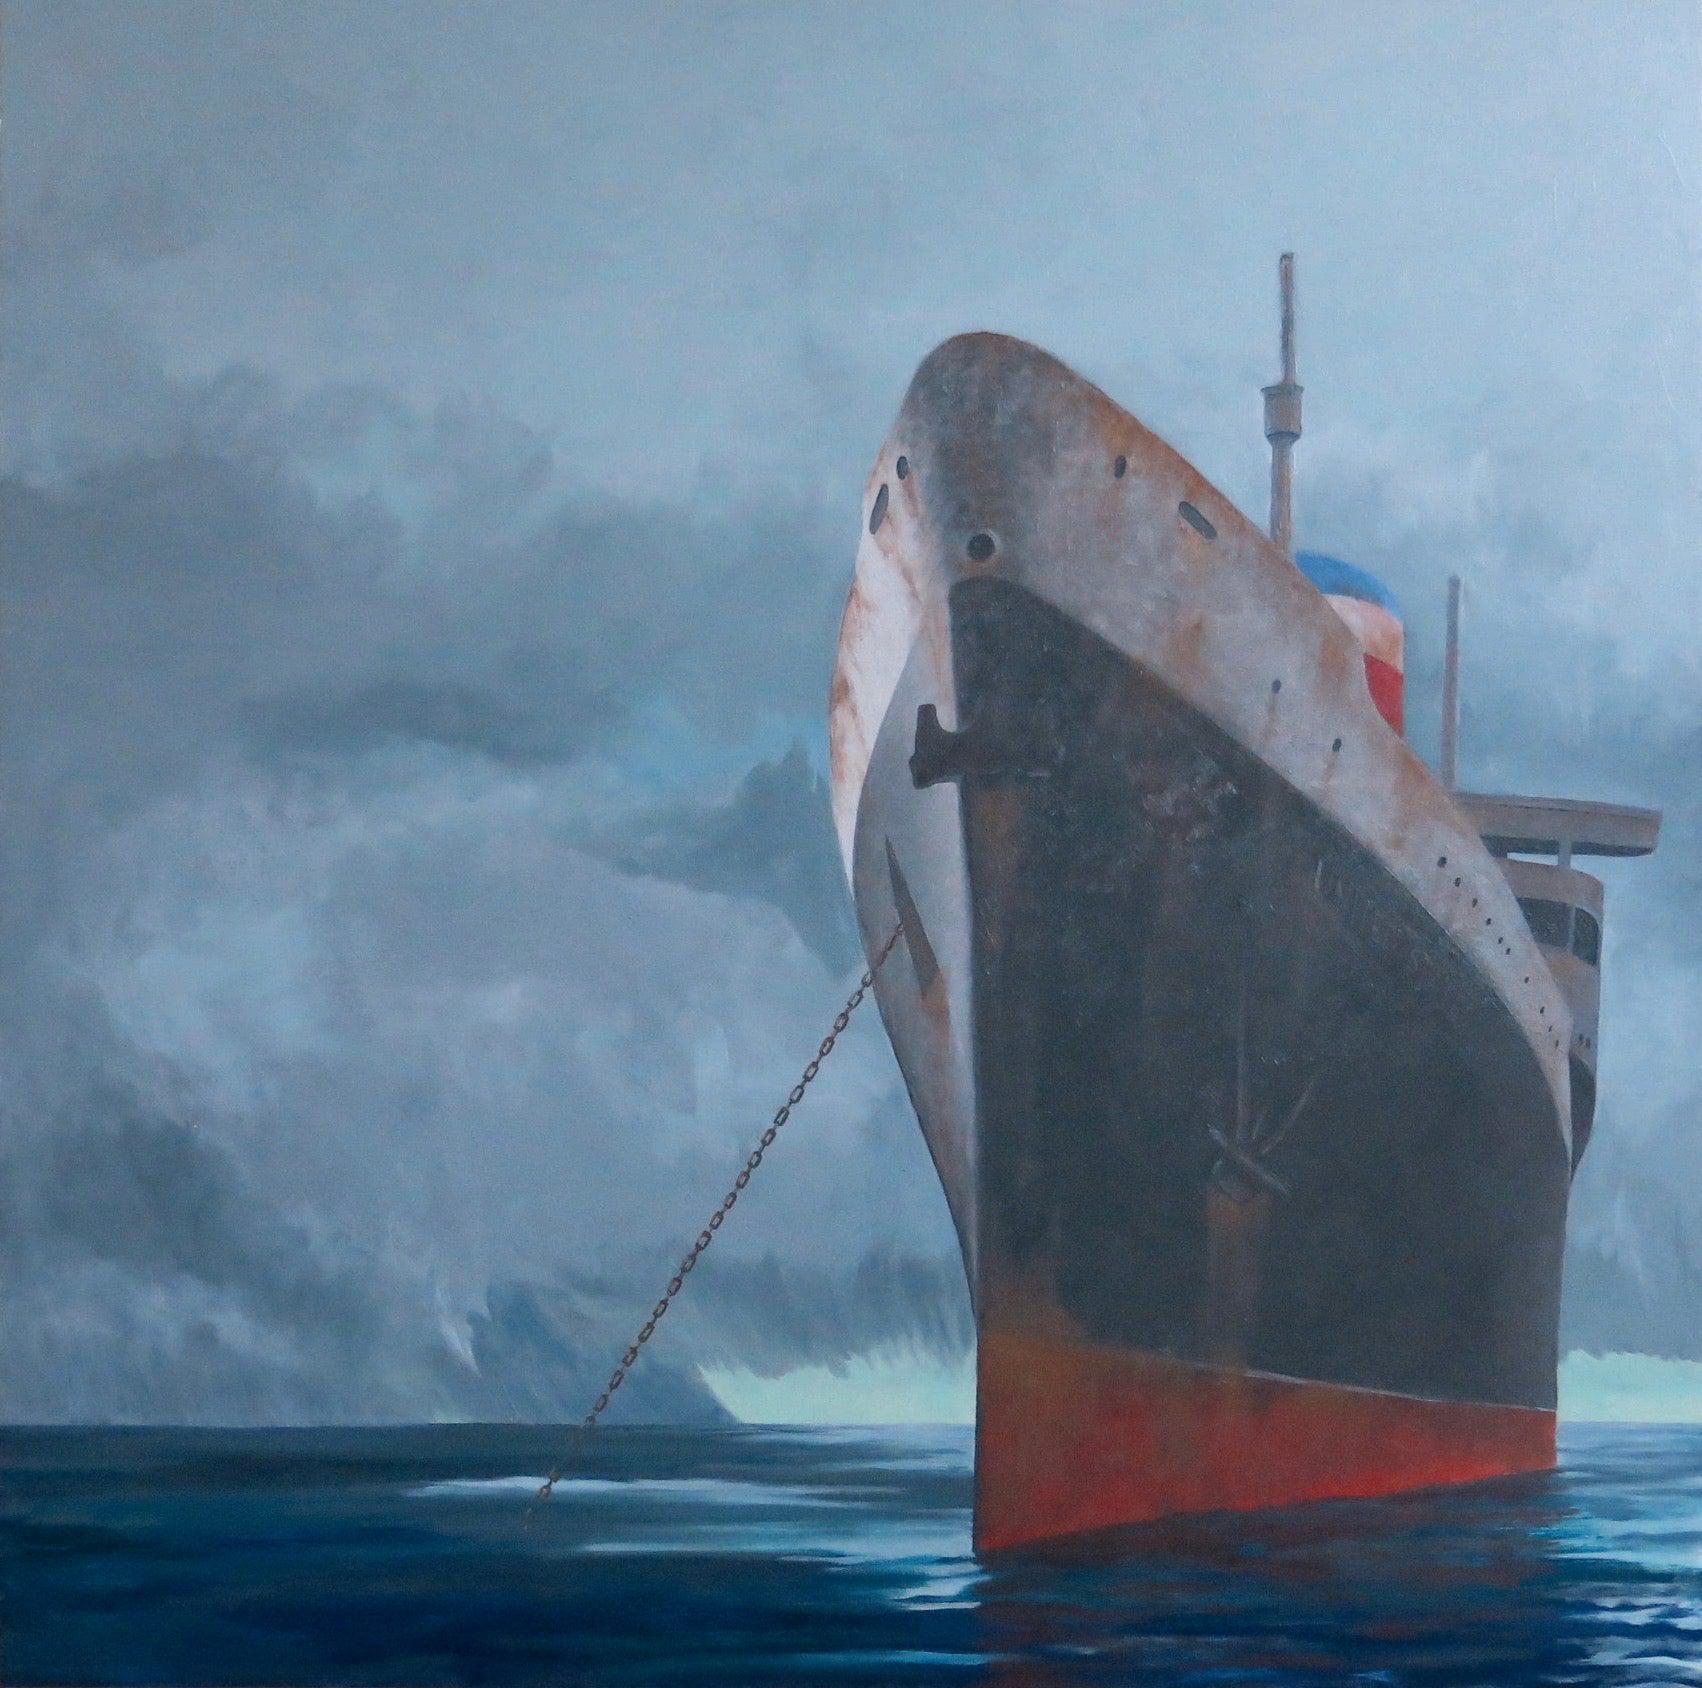 SS United States-Painting-David Knowlton-Sorrel Sky Gallery